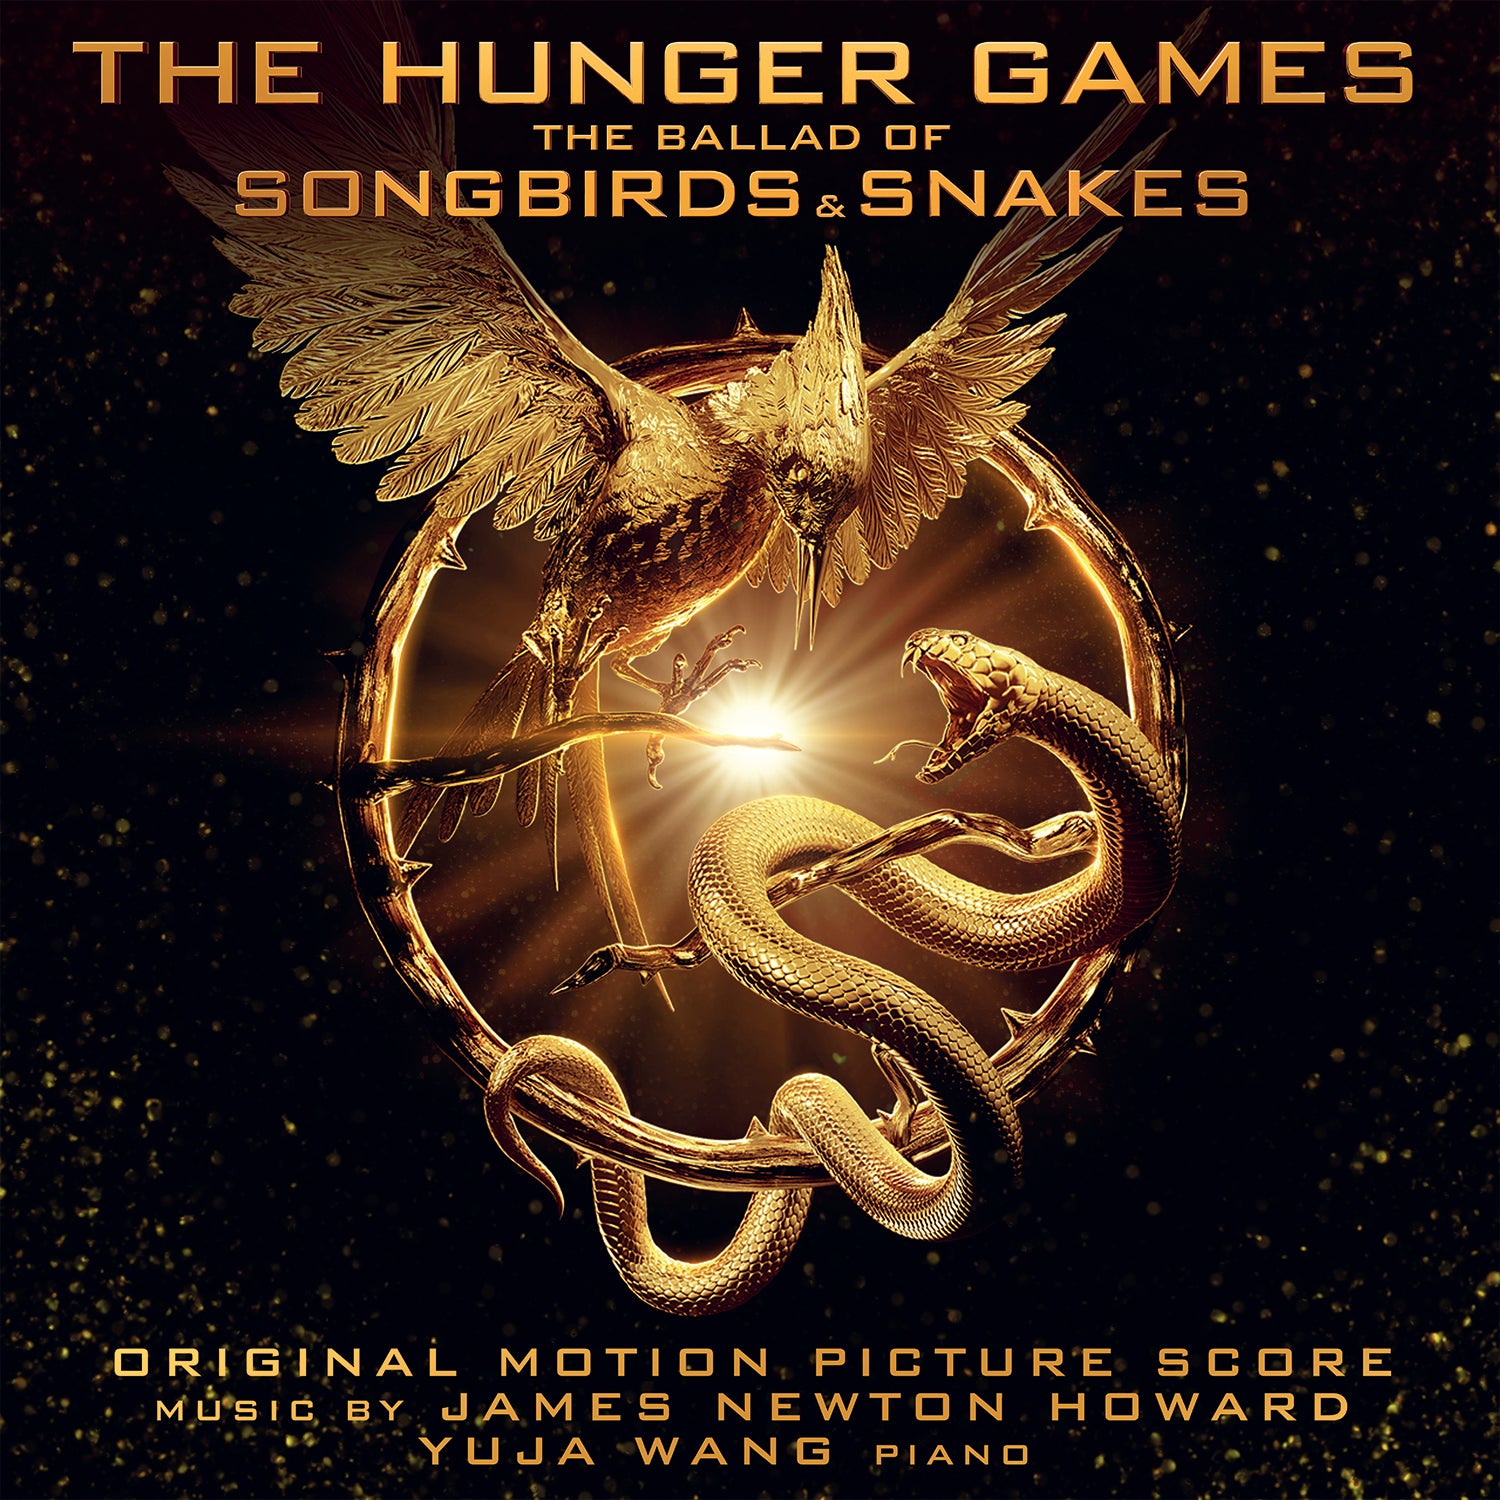 The Hunger Games : The Ballad of Songbirds and Snakes